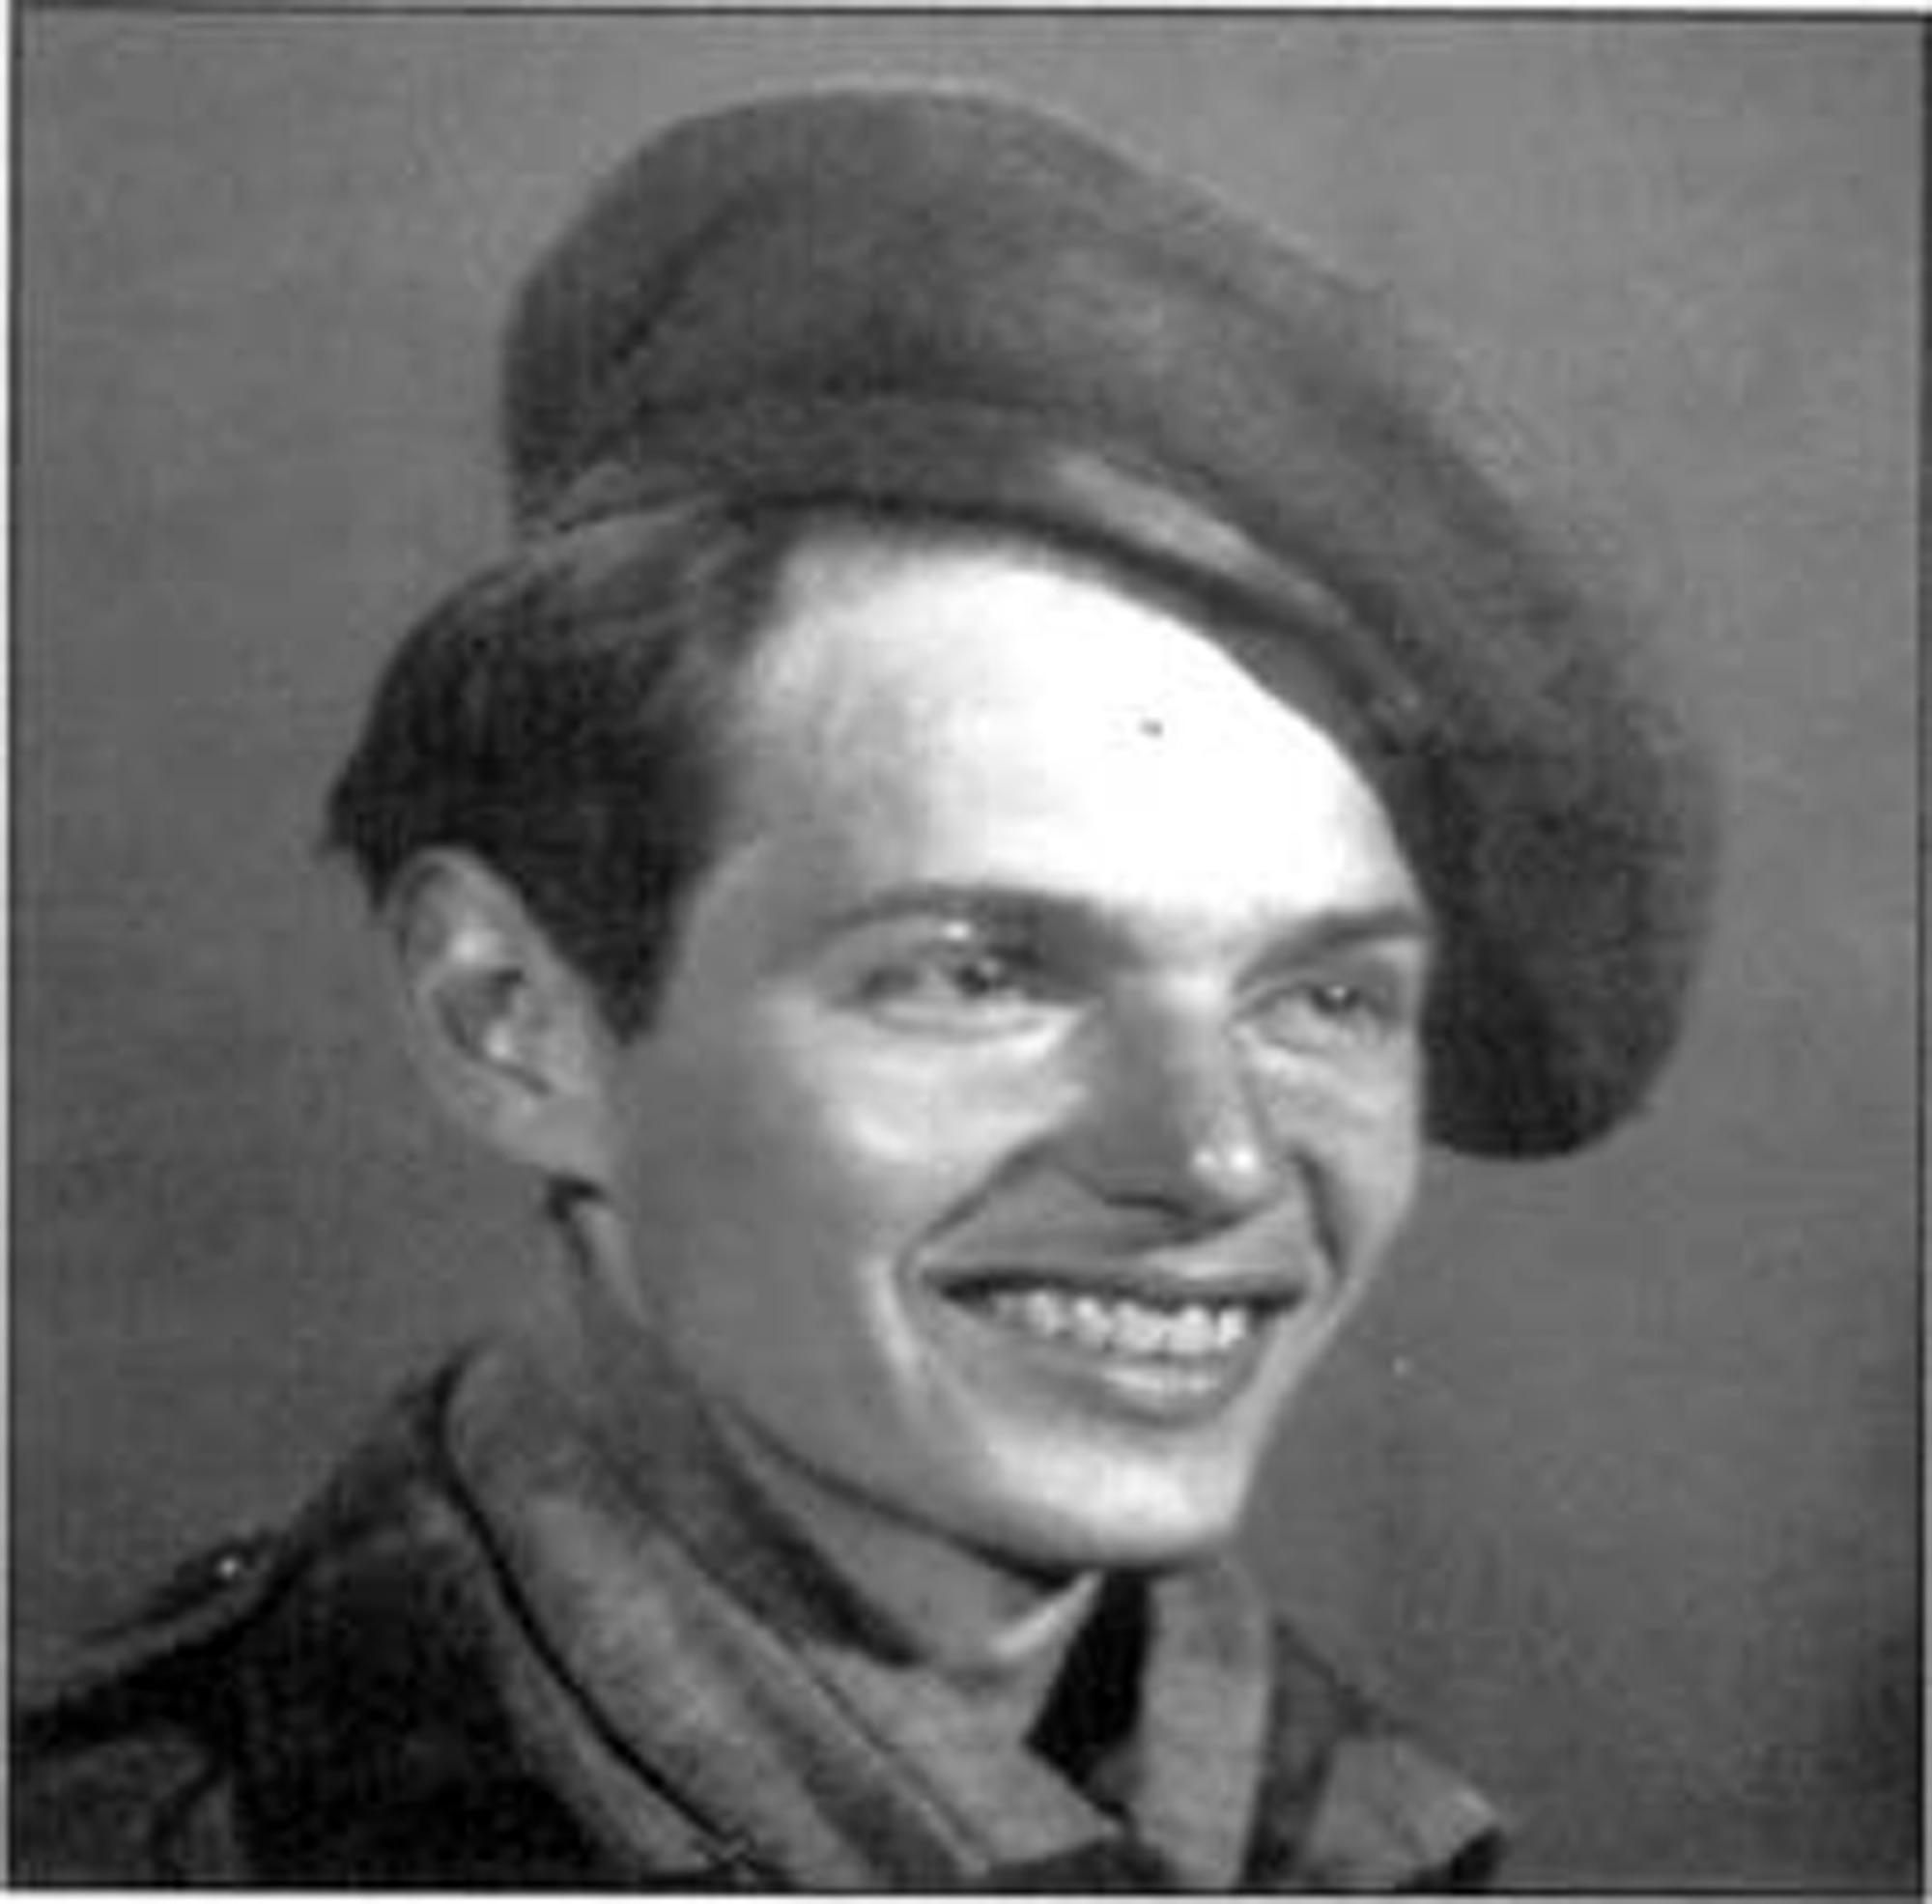 This photo was taken of Tech. Sgt. Airey in Belgium, May 1945, one week after the British liberated him as a prisoner of war. 